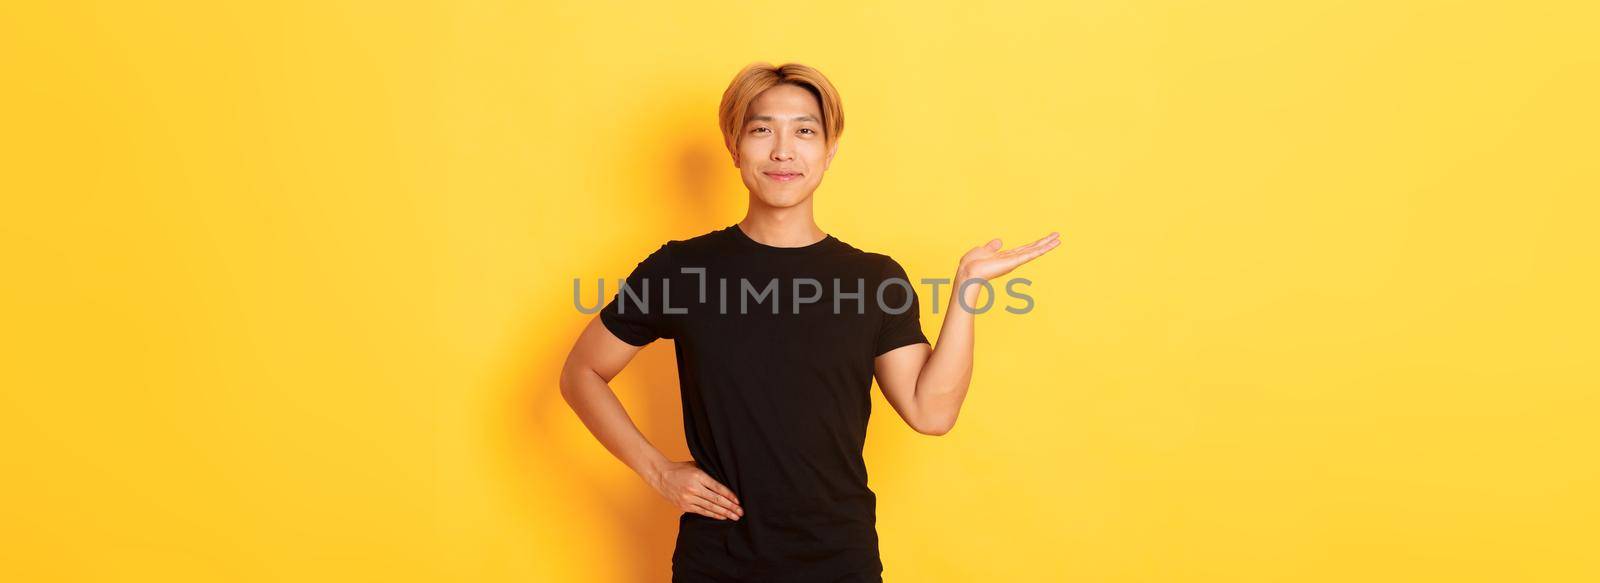 Portrait of happy and proud smiling asian guy holding something on hand over yellow background.